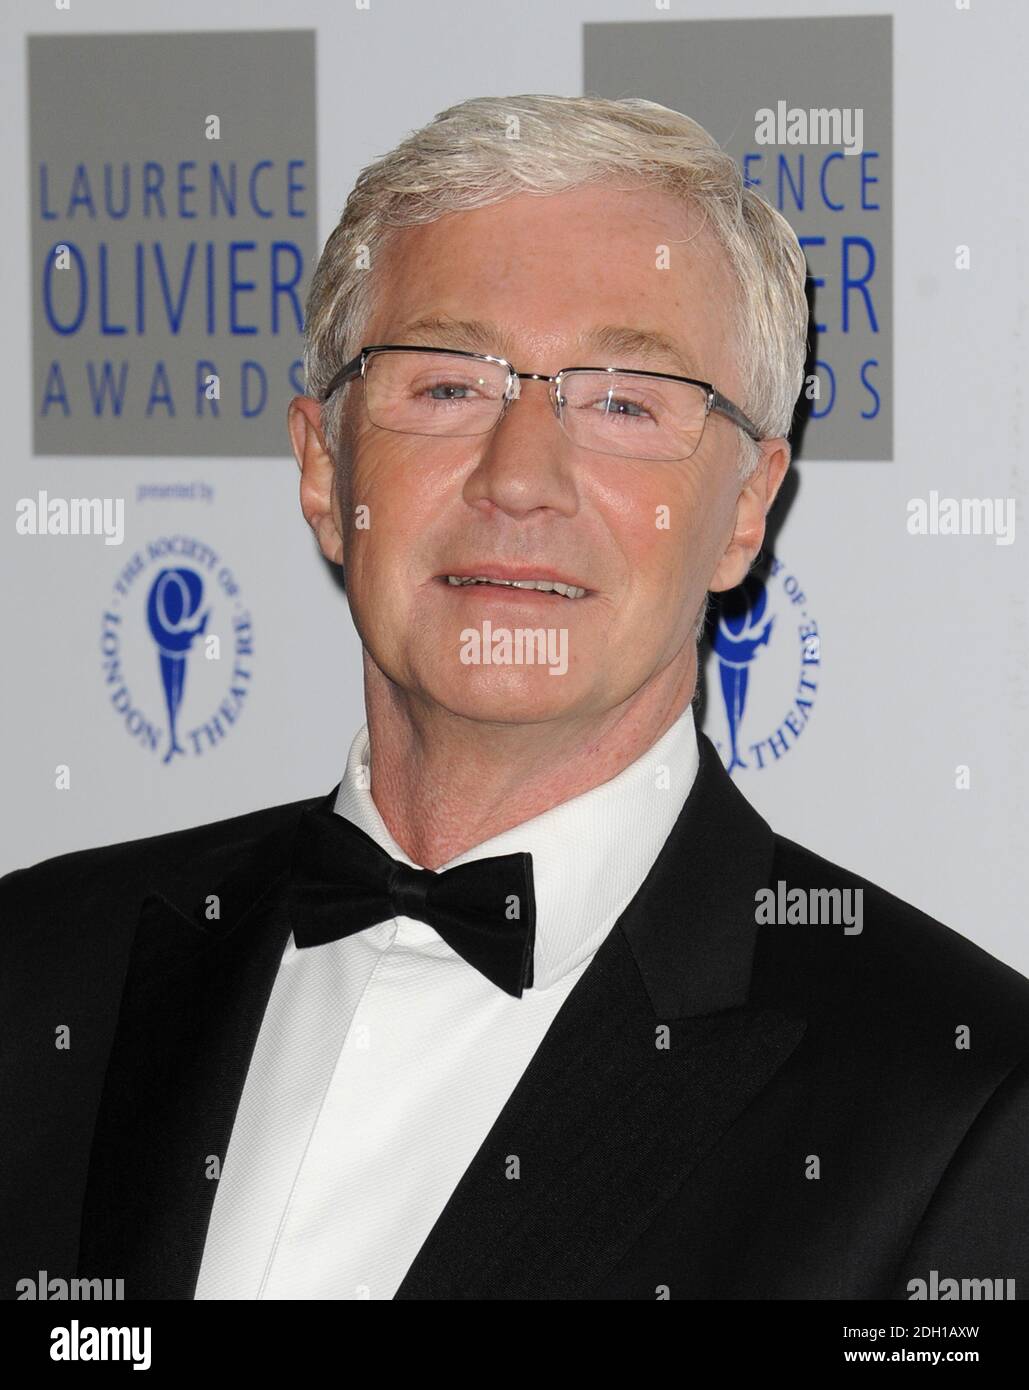 Paul Ogrady during the Laurence Olivier Awards 2010 at the Grosvenor House Hotel, Park Lane, London. Stock Photo